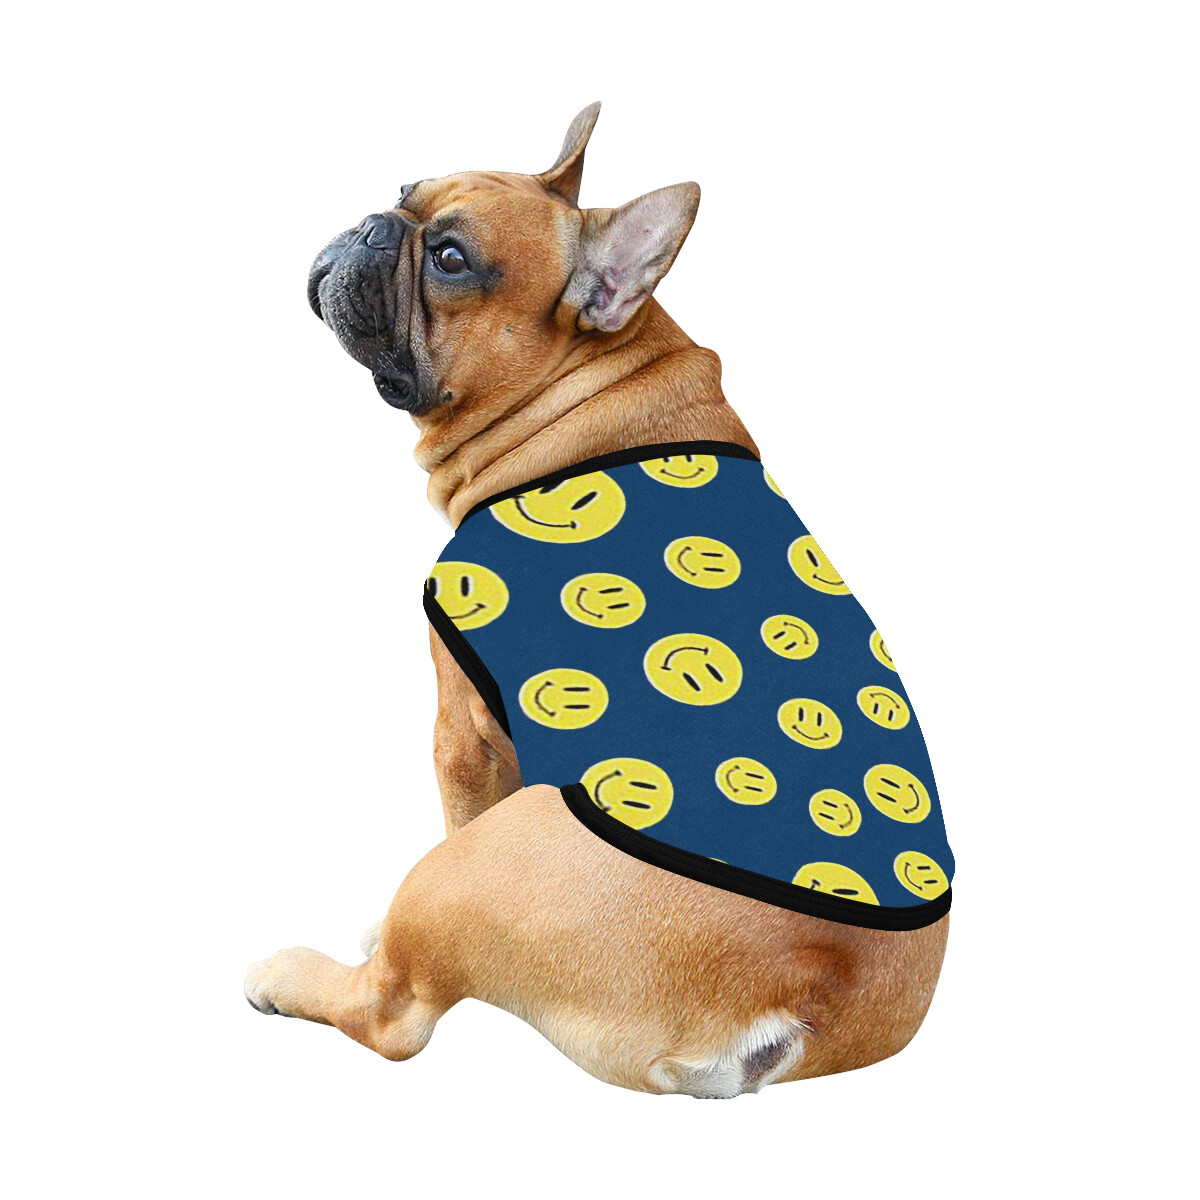 🐕 Happy faces Dog Tank Top, Dog shirt, Dog clothes, Gifts, front back print, 7 sizes XS to 3XL, dog t-shirt, dog t-shirt, dog gift, navy